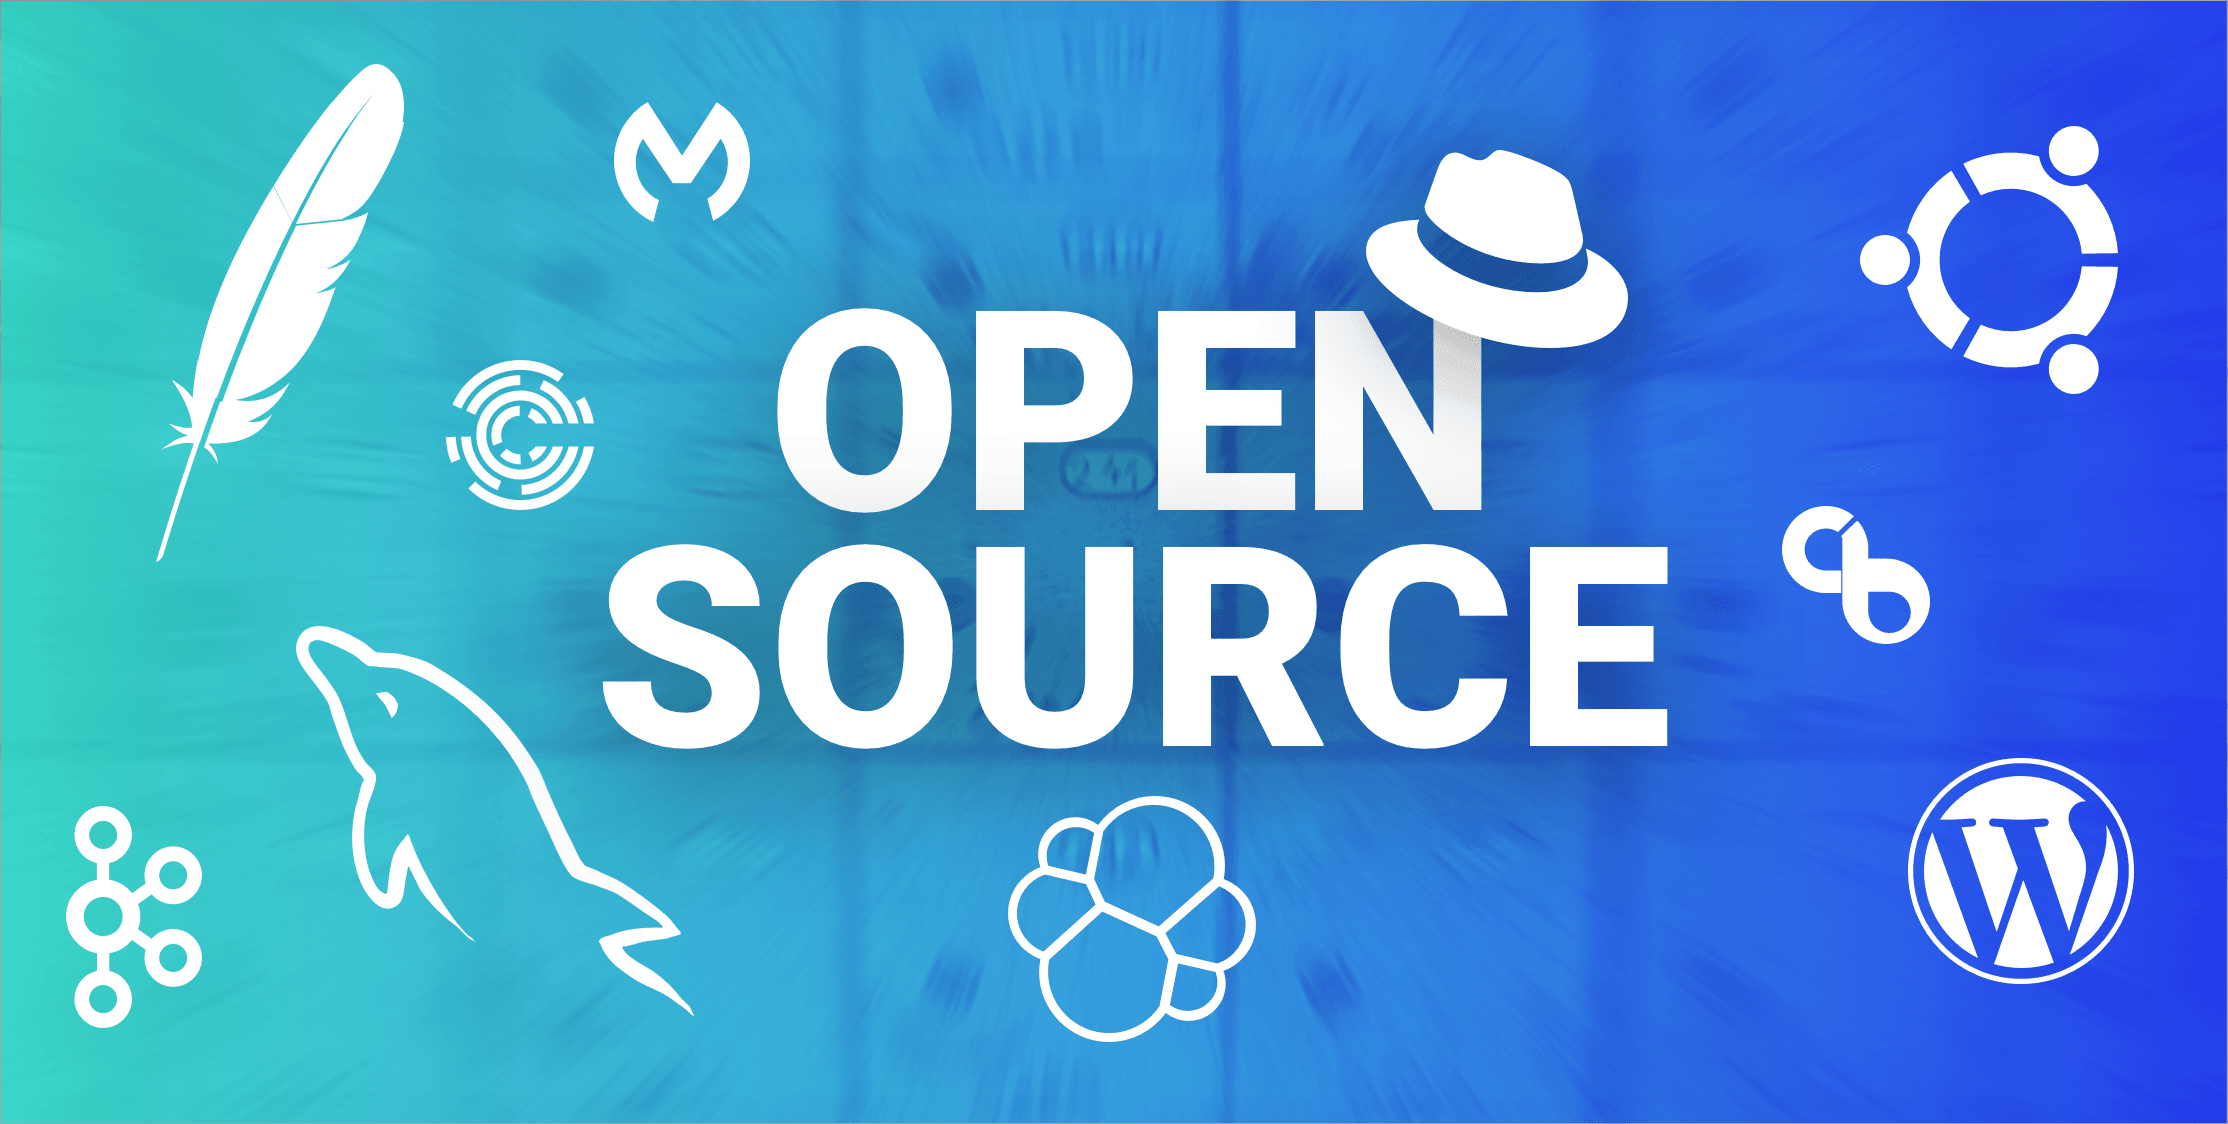 Top Companies That Have Open Source Products: 10 Companies To Know